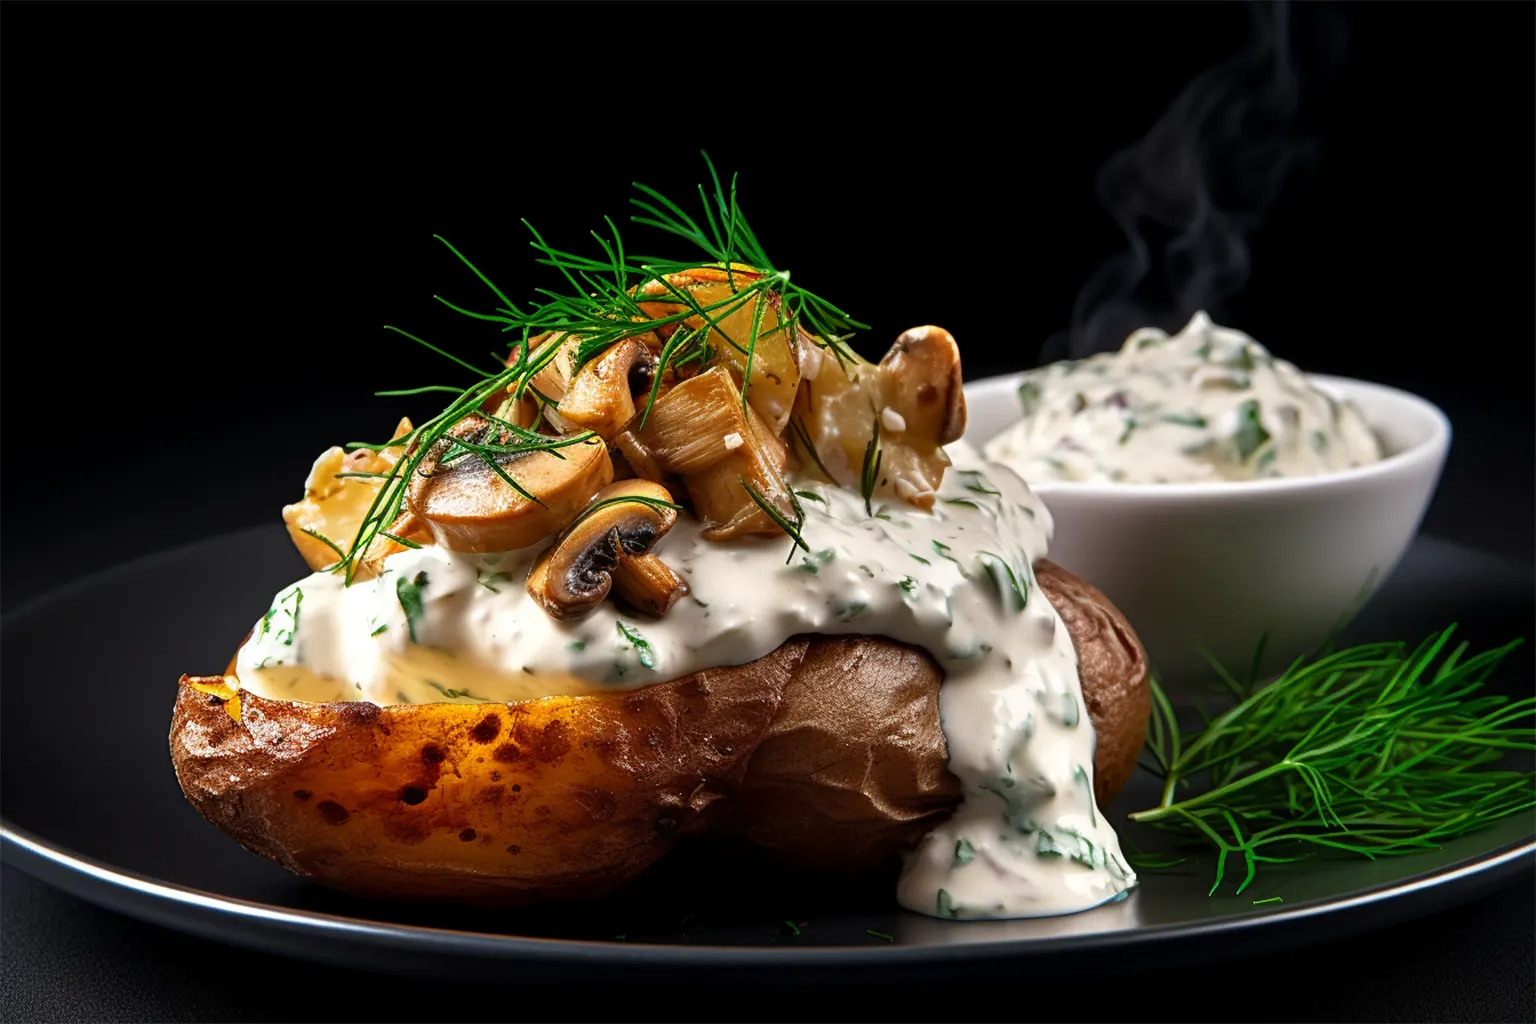 Baked potato with Sour Cream, Herbs and Fried Mixed Mushrooms